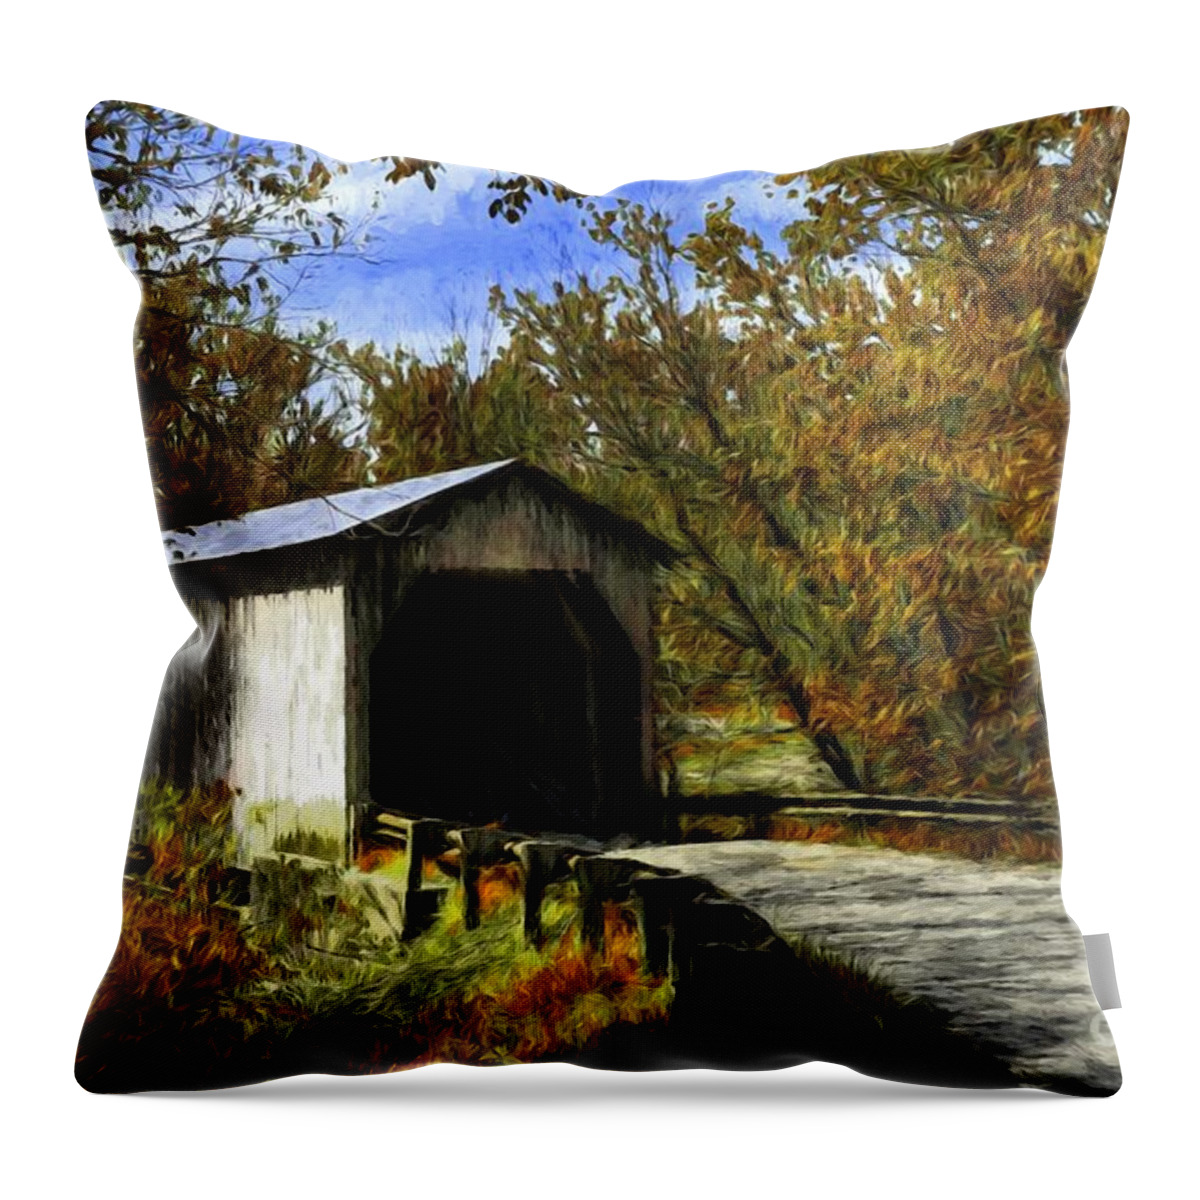 Kentucky Throw Pillow featuring the photograph Dover Covered Bridge In Autumn by Mel Steinhauer